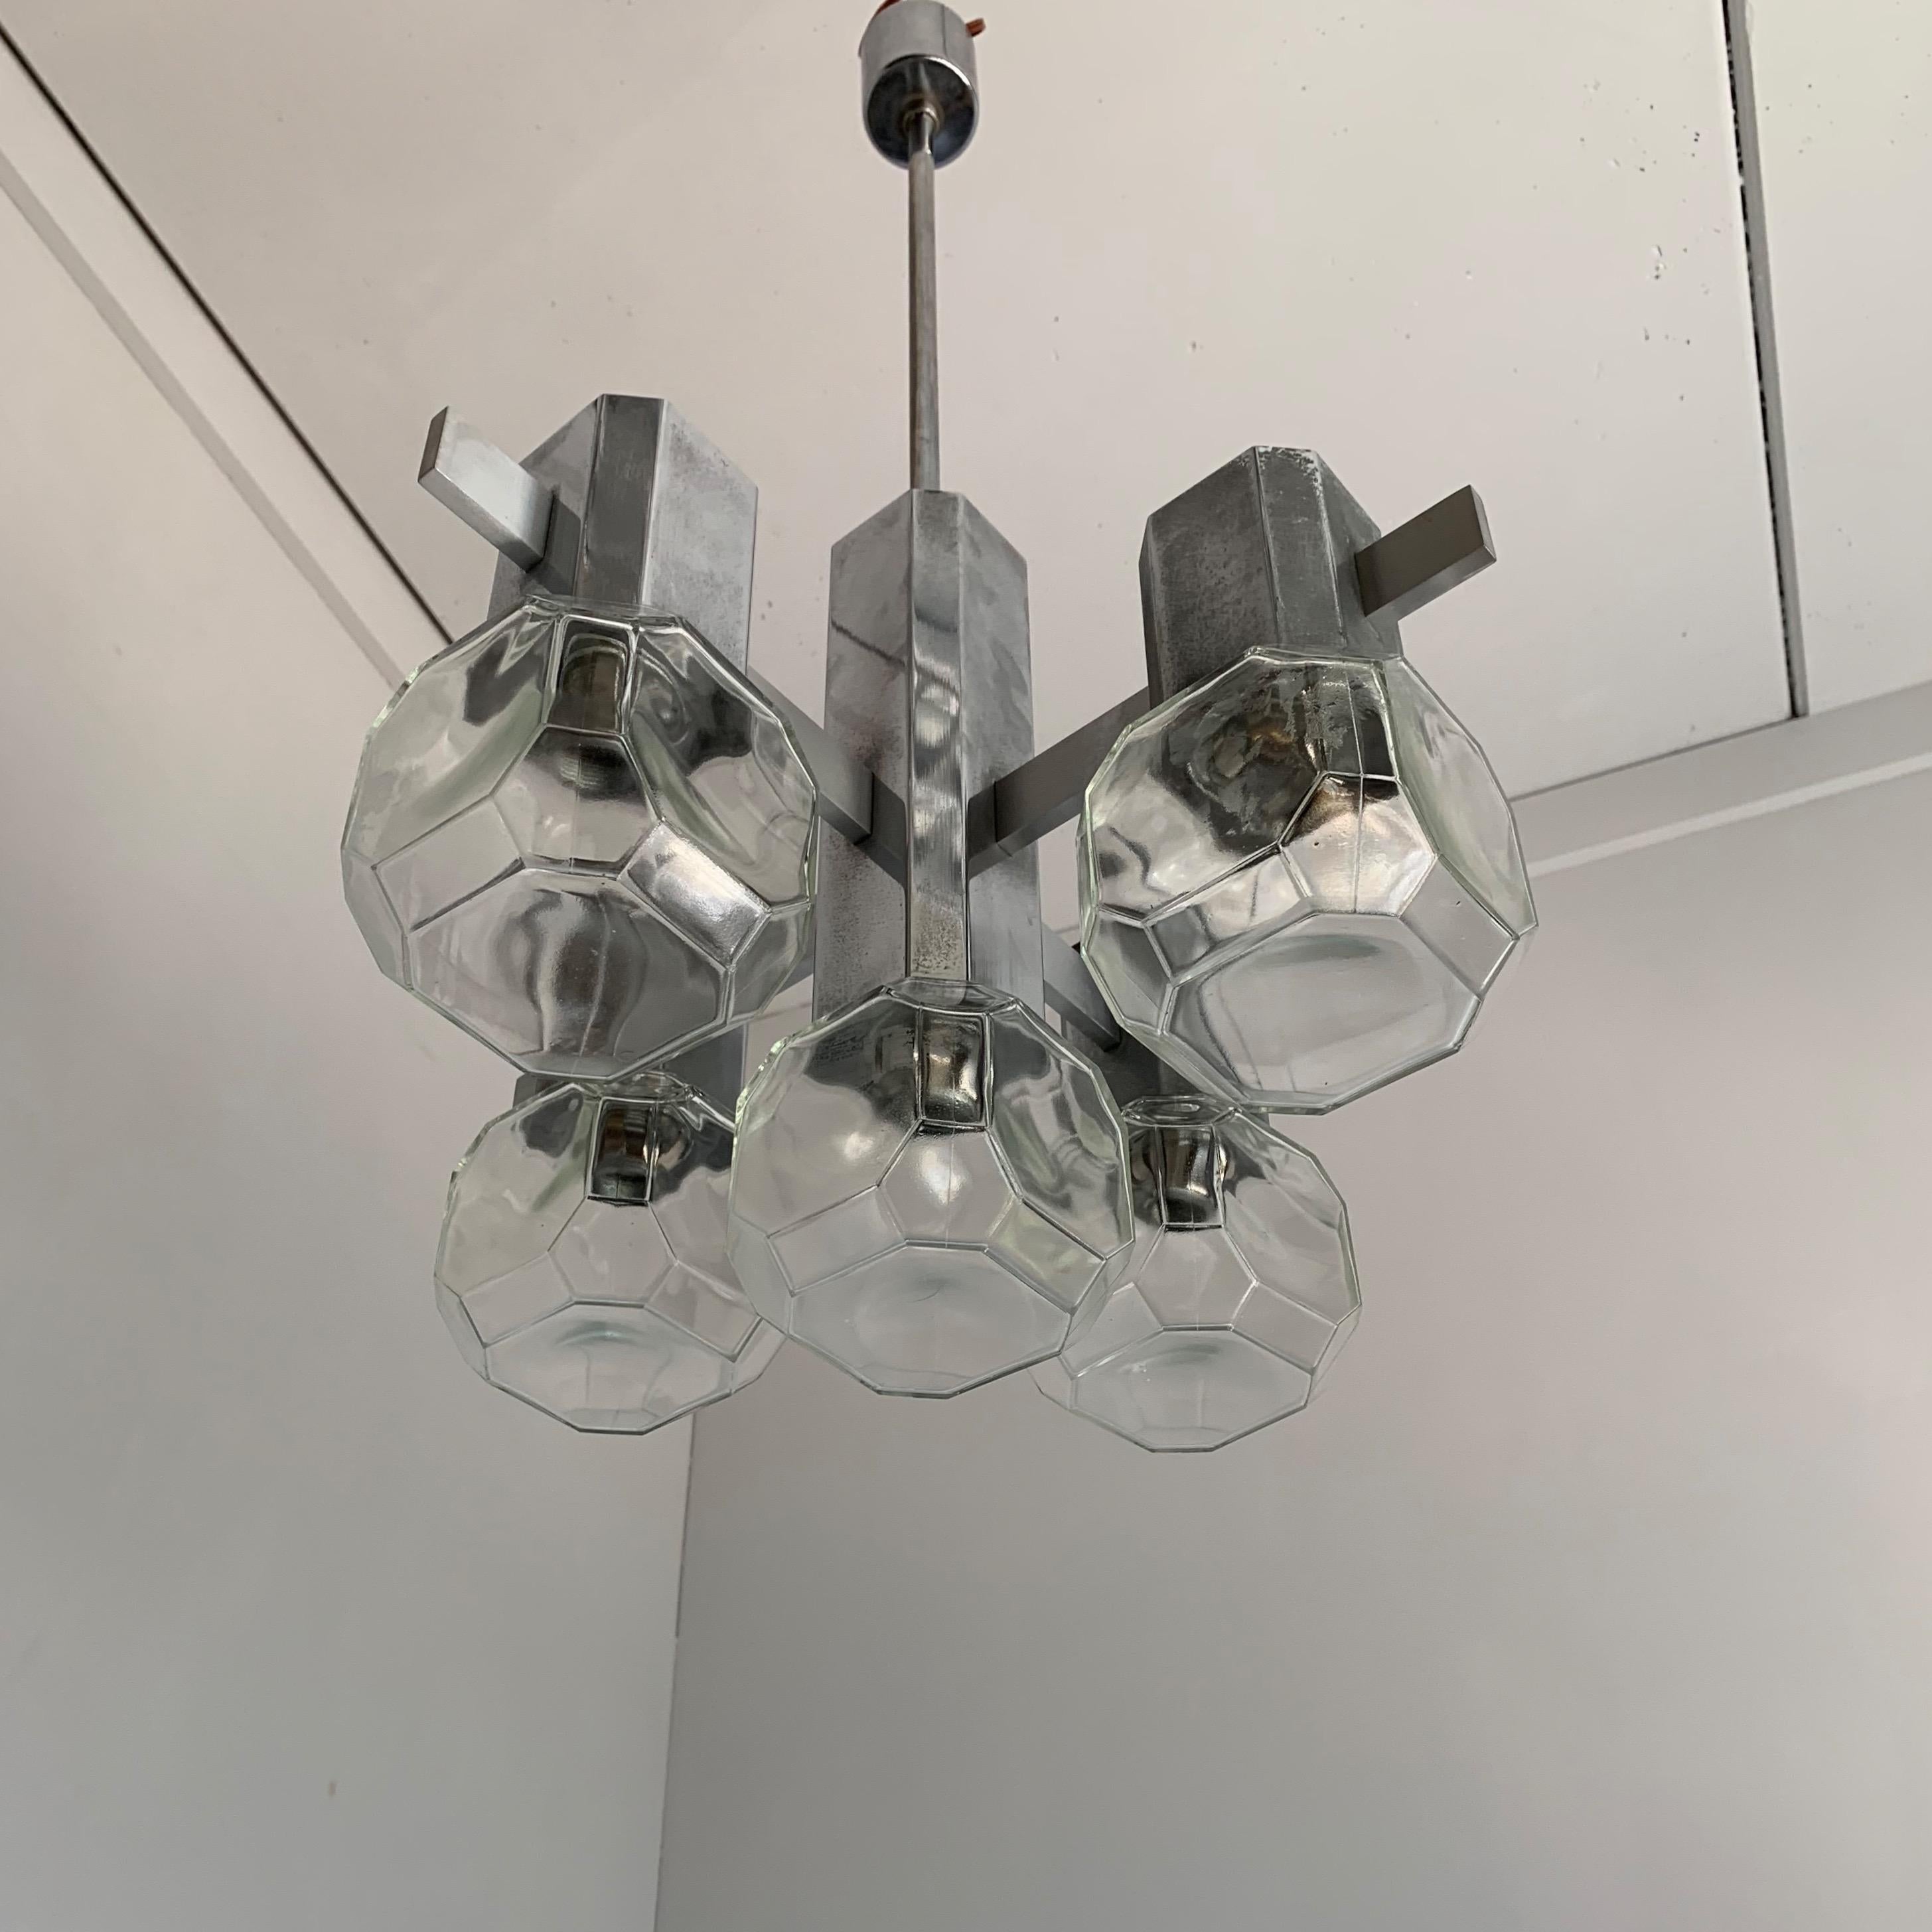 Rare and perfect design, Italian Murano Glass  chandelier.

This probably unique and truly geometrical, five-light pendant is entirely made of shiny chrome metal and it comes with all the original glass shades. This is a very strong make and the